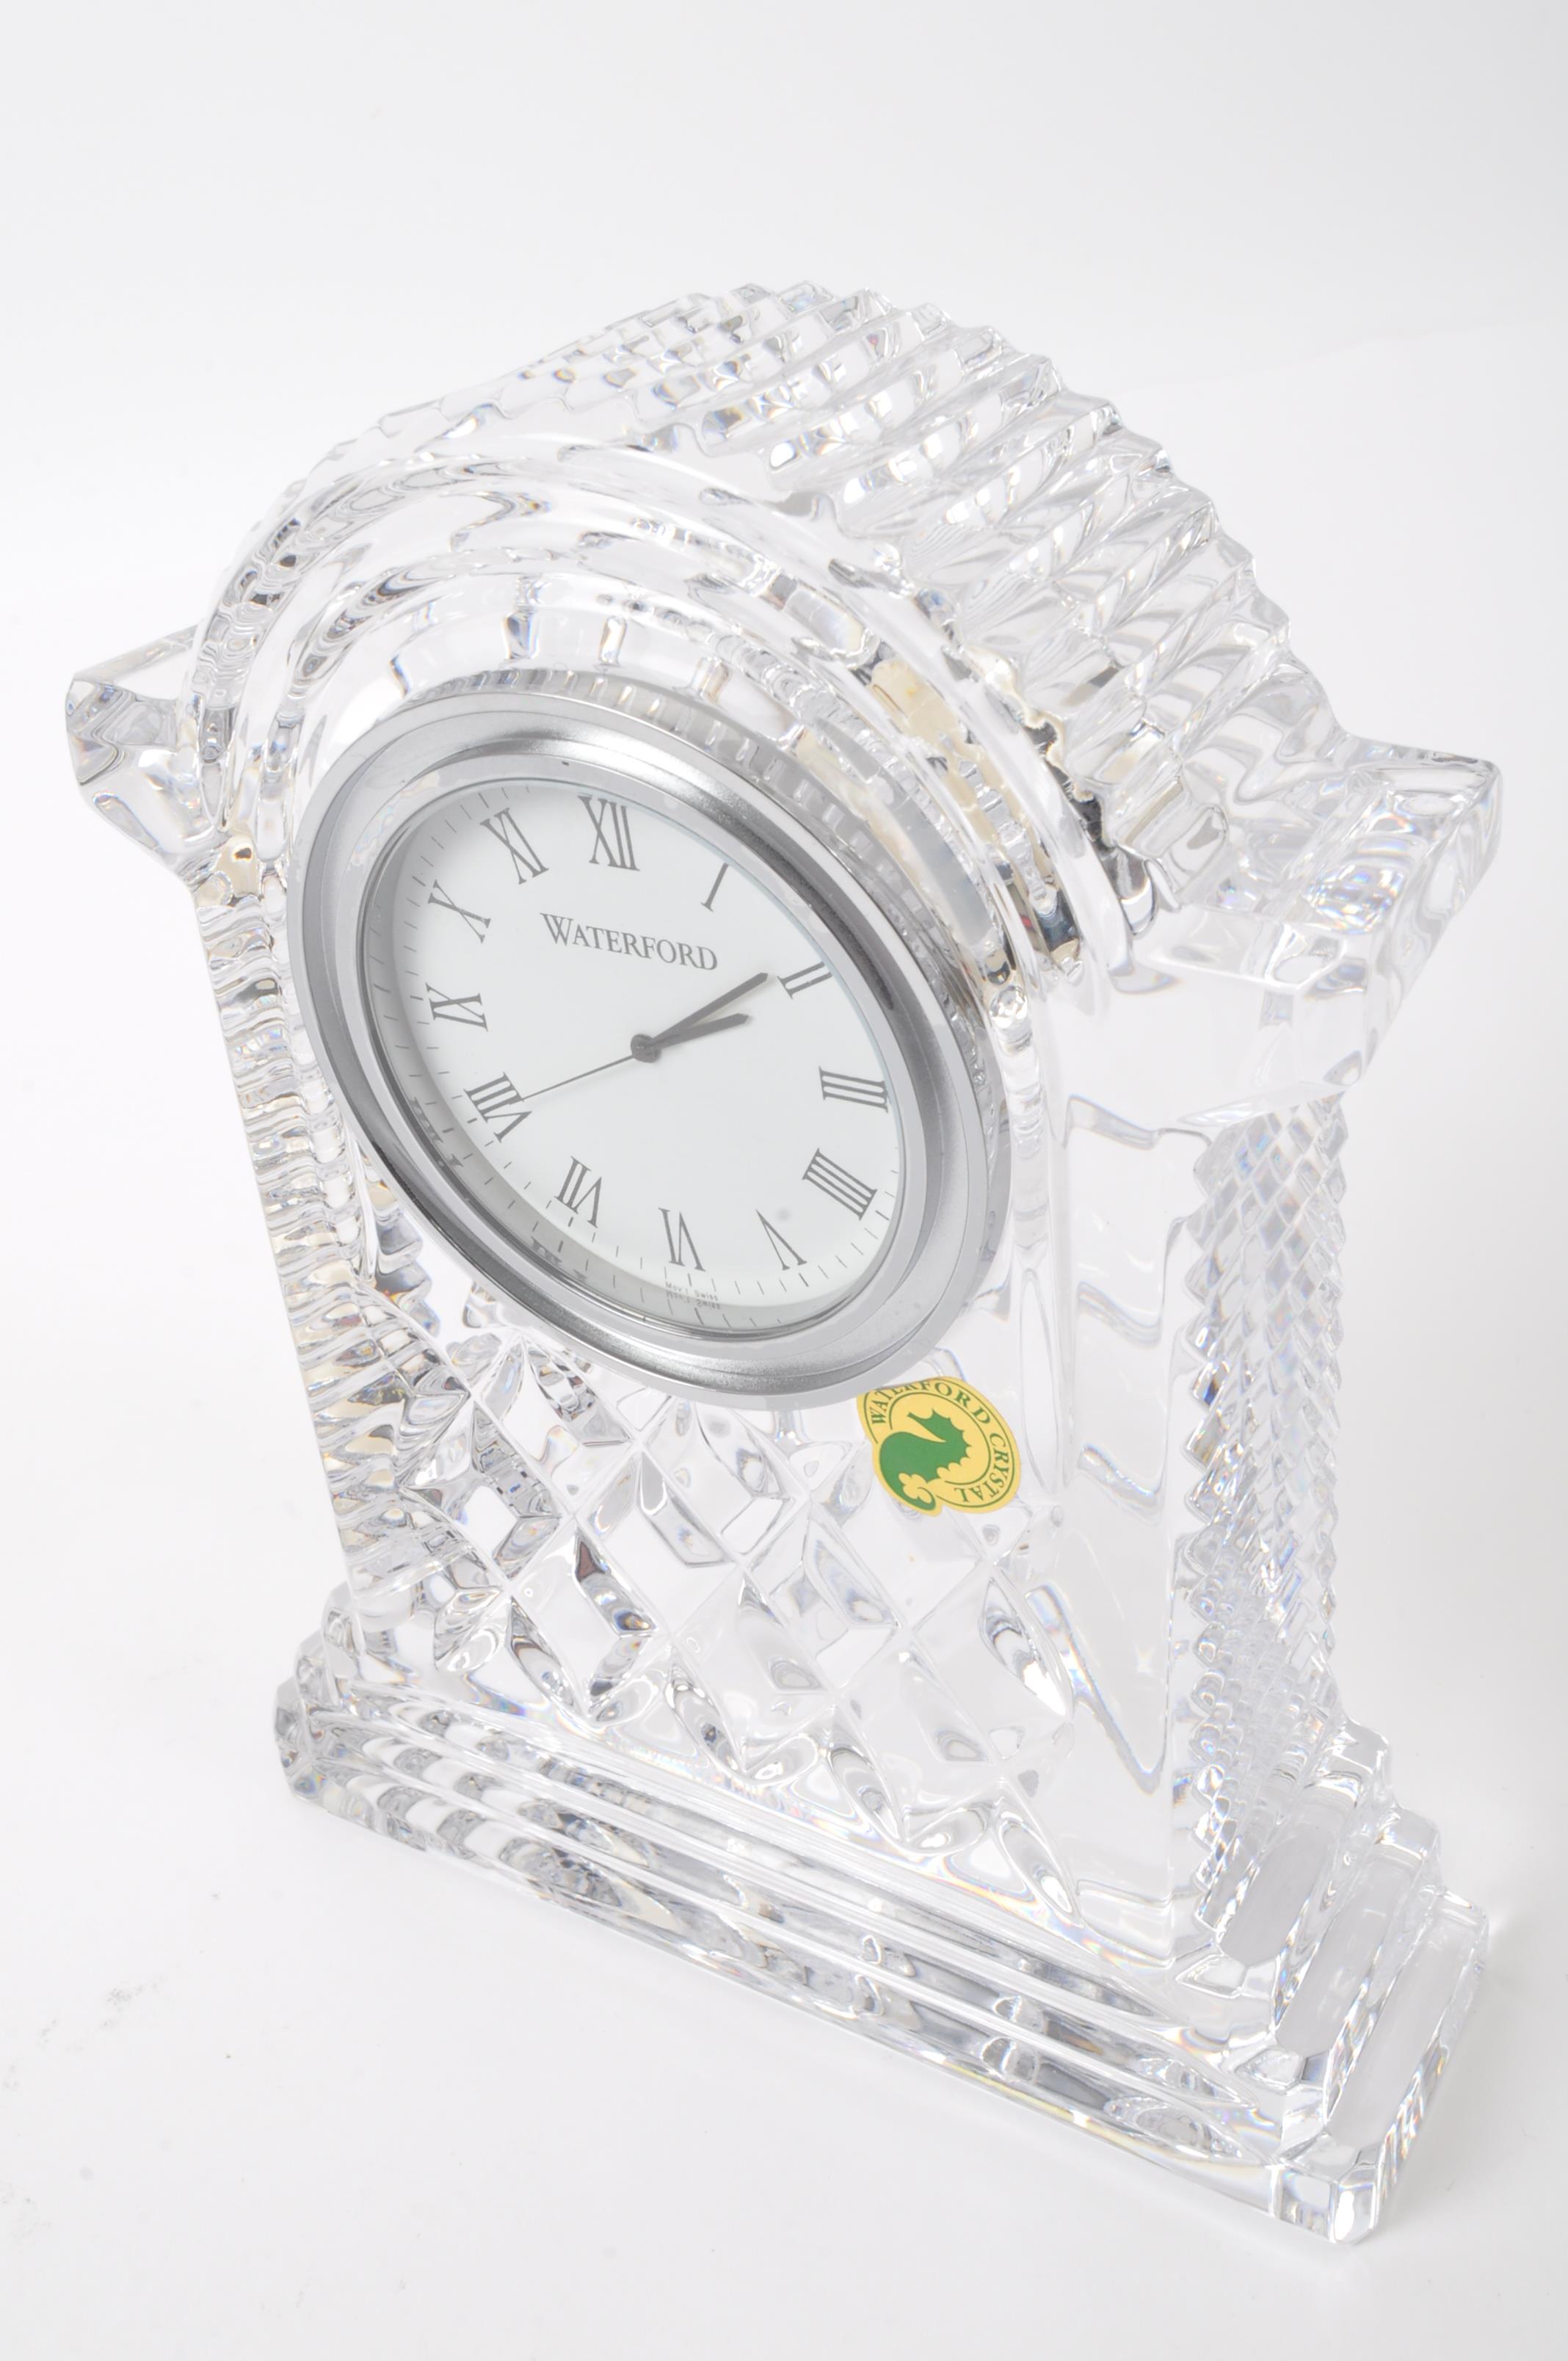 WATERFORD CRYSTAL GLASS NOS MANTEL CLOCK - Image 2 of 6